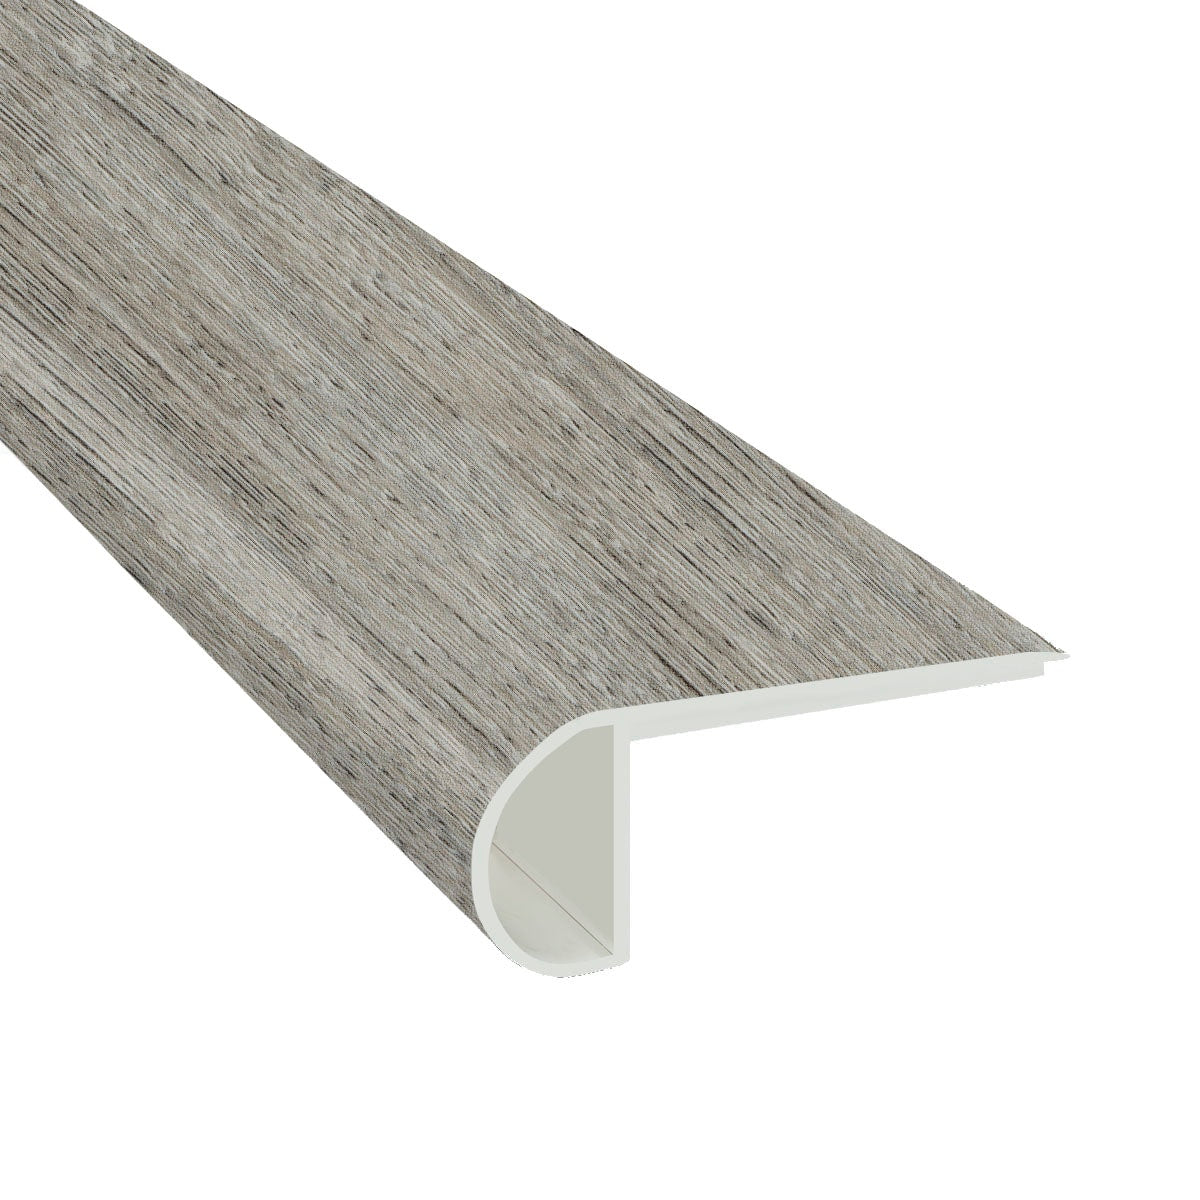 Vinyl Planks Moldings - Cabot Collections